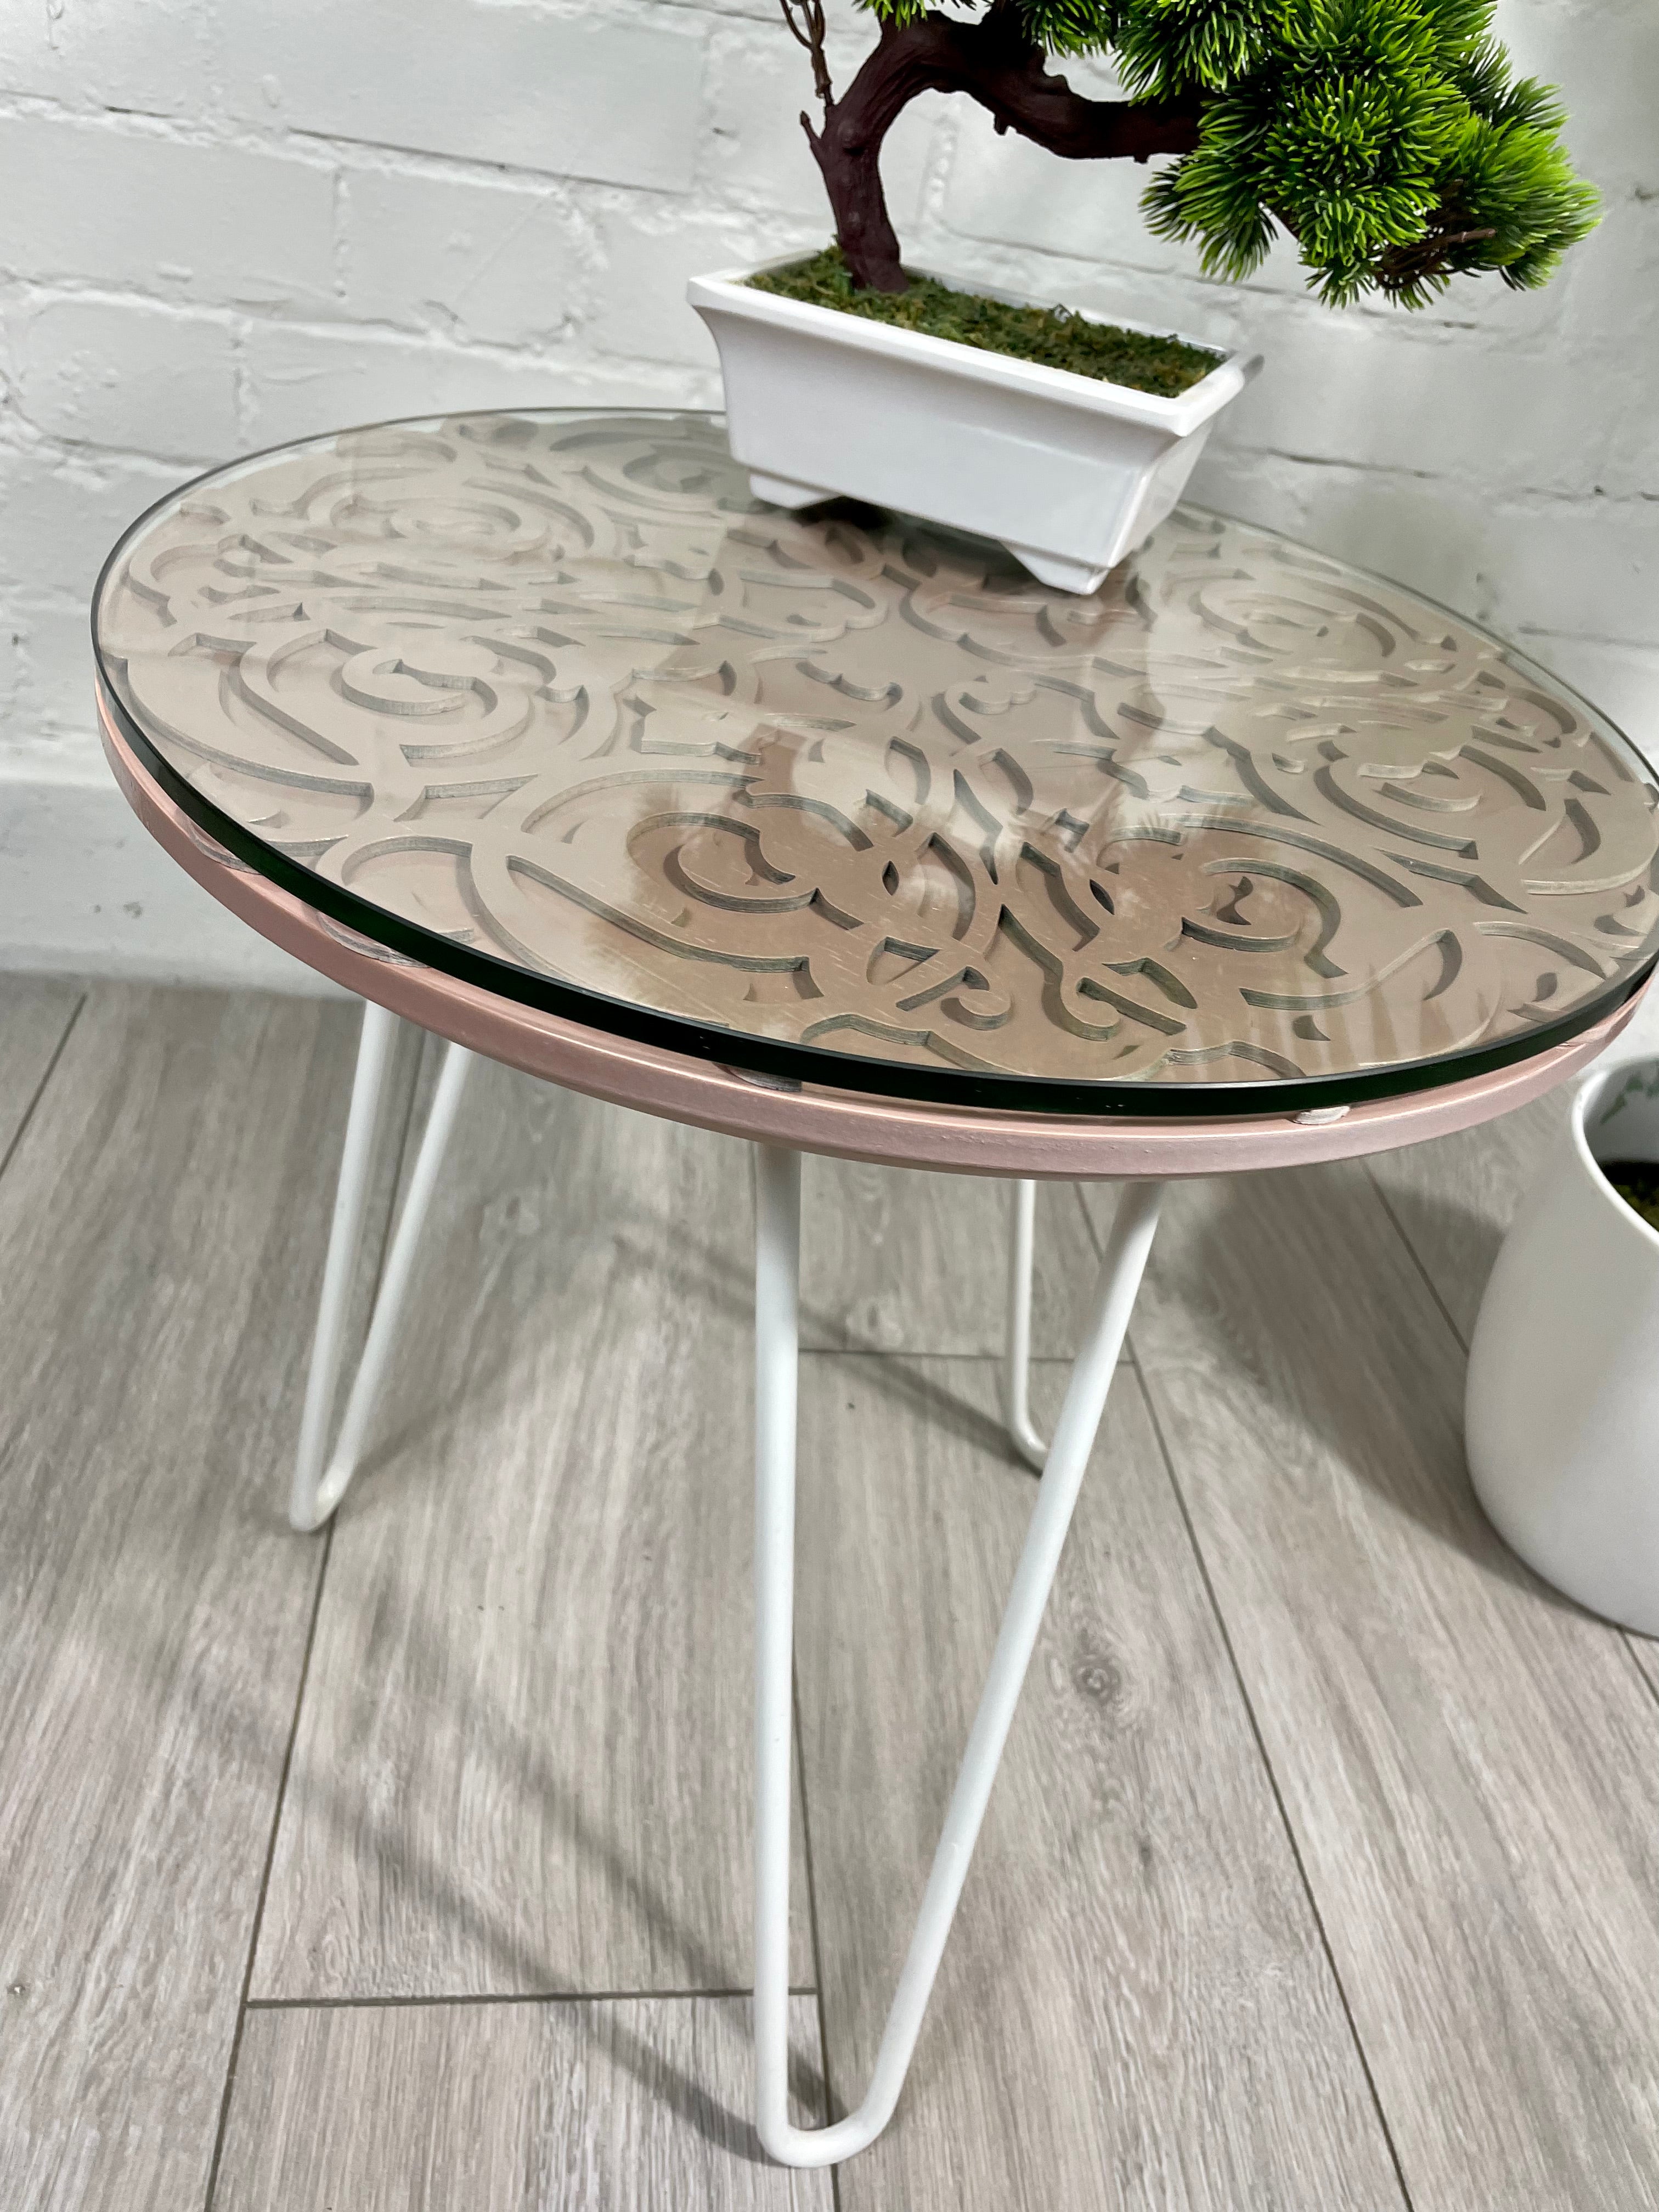 Arabesque Moroccan Side Table in Pastel Pink Finish Pin Legs Zellige Table Glass Top